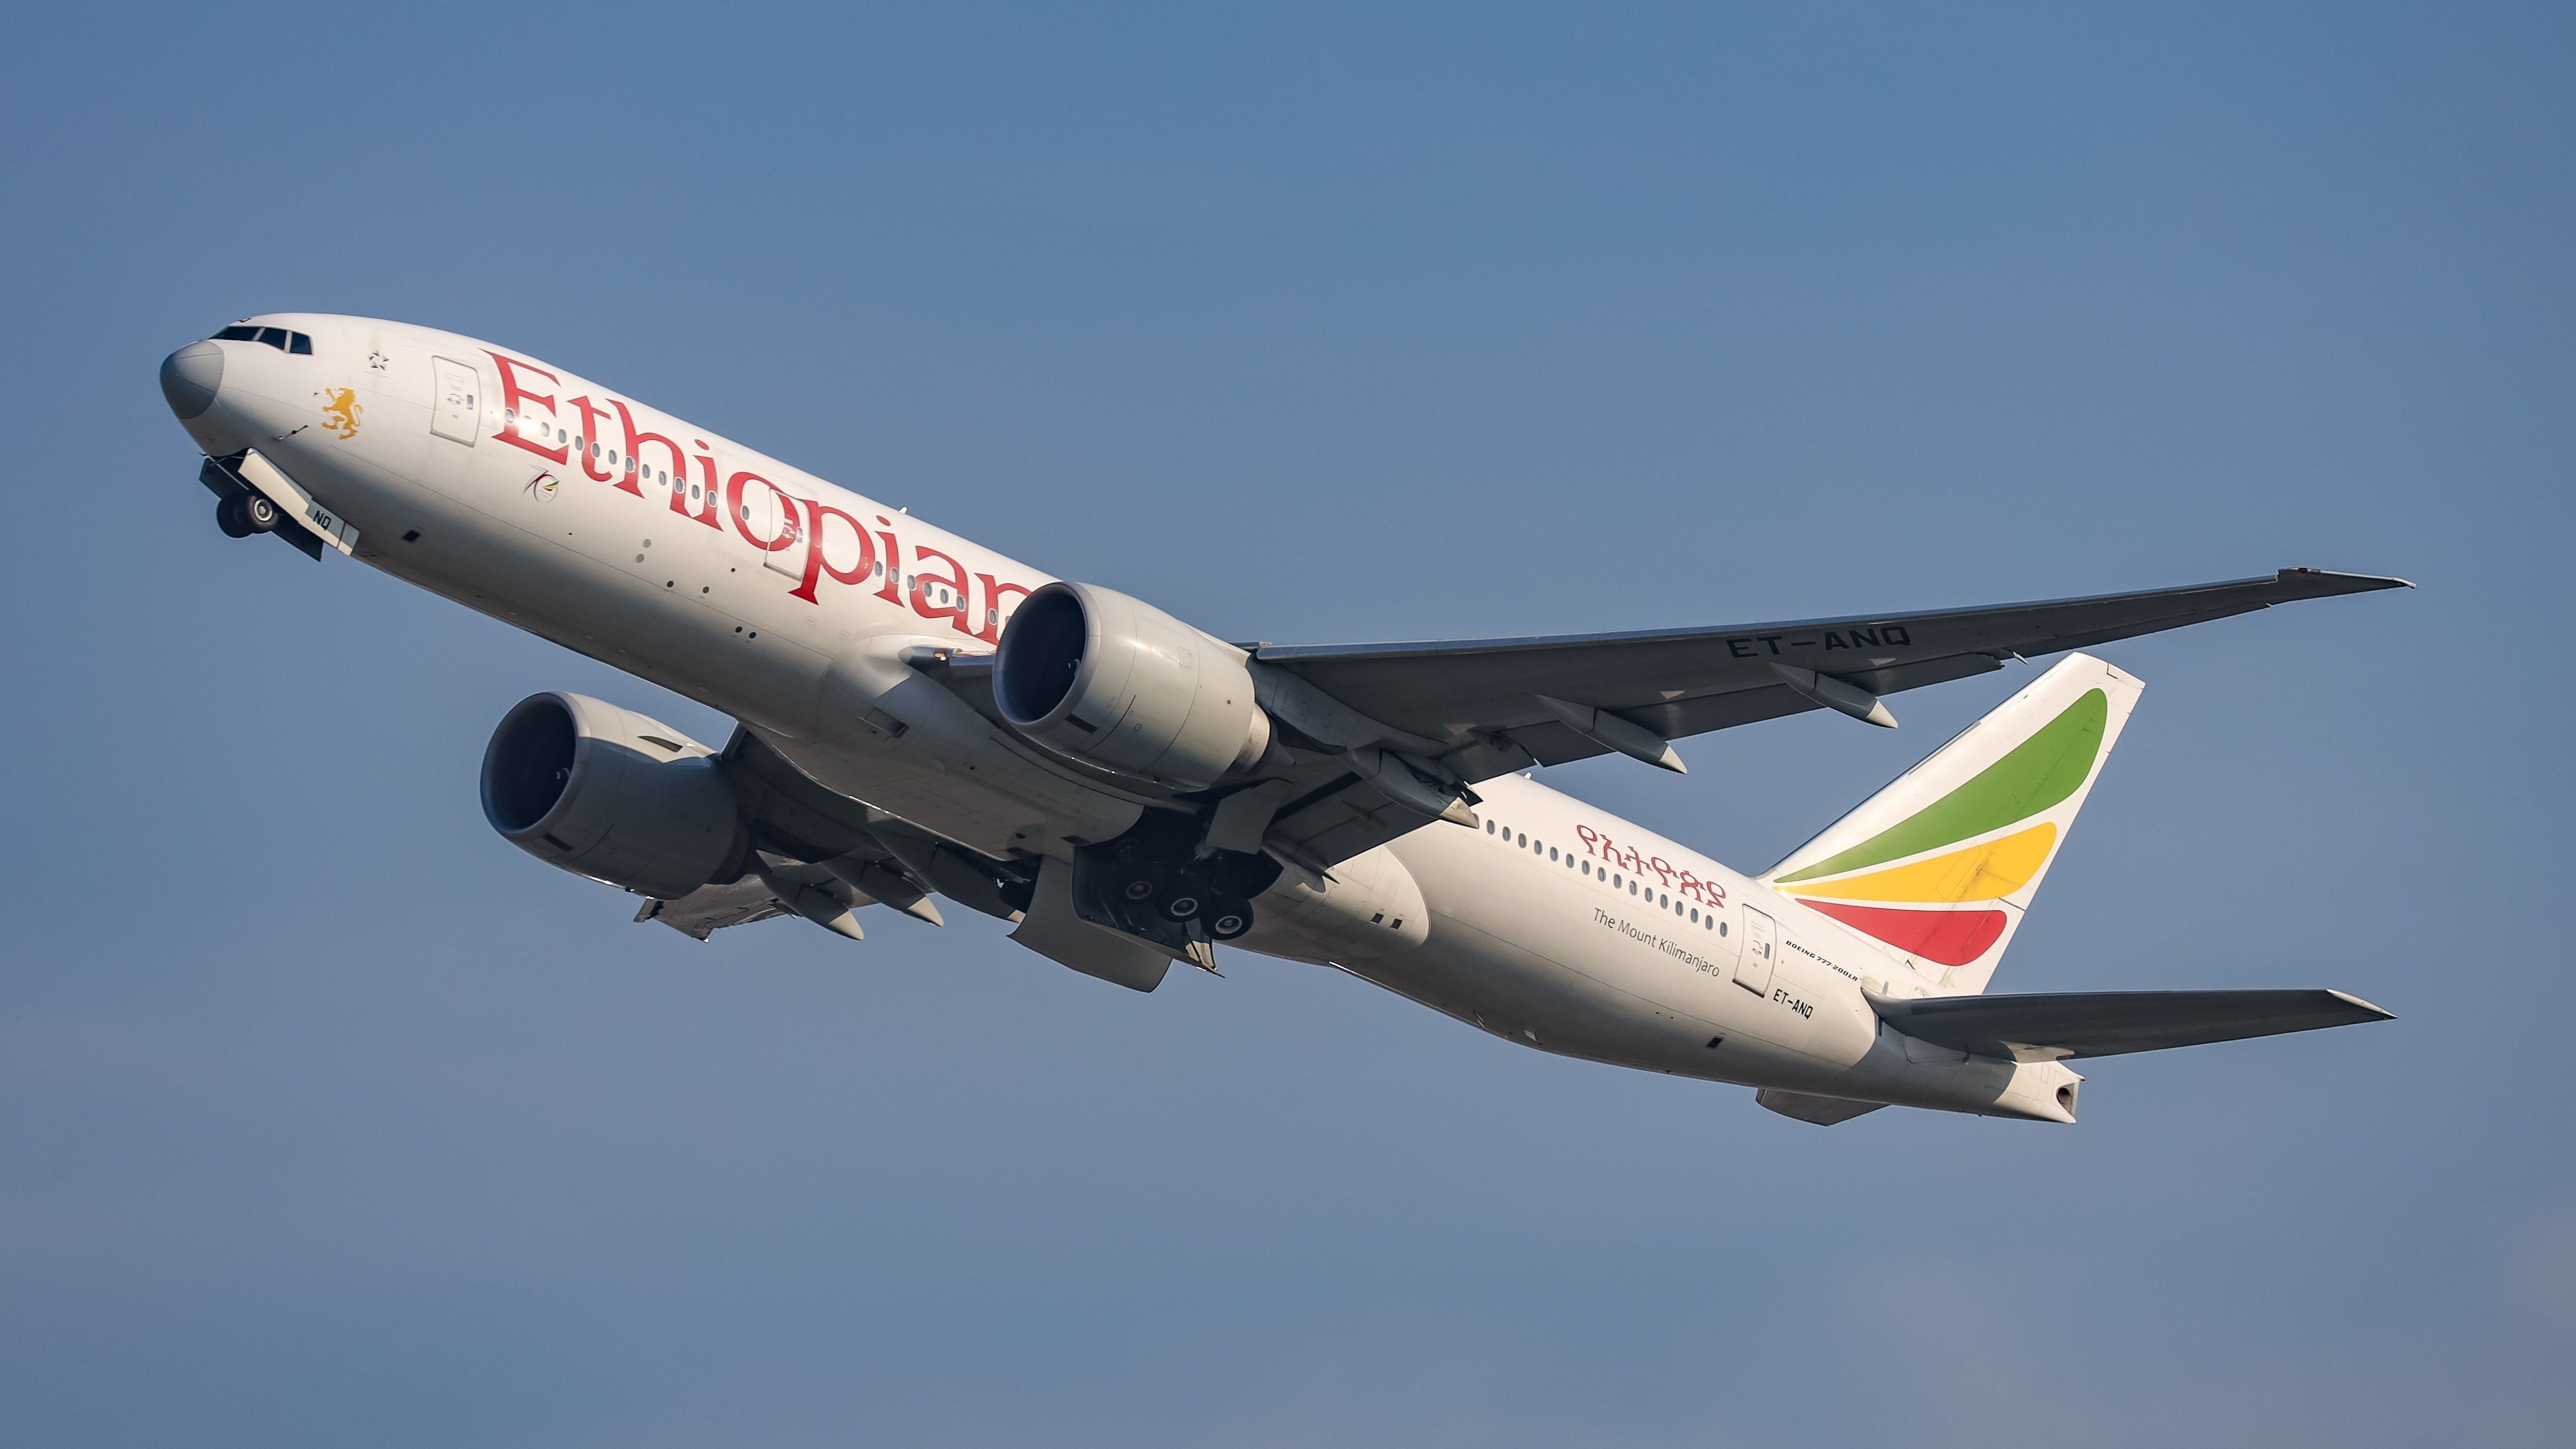 An Ethiopian Airlines Boeing 777-200LR flying in the sky.